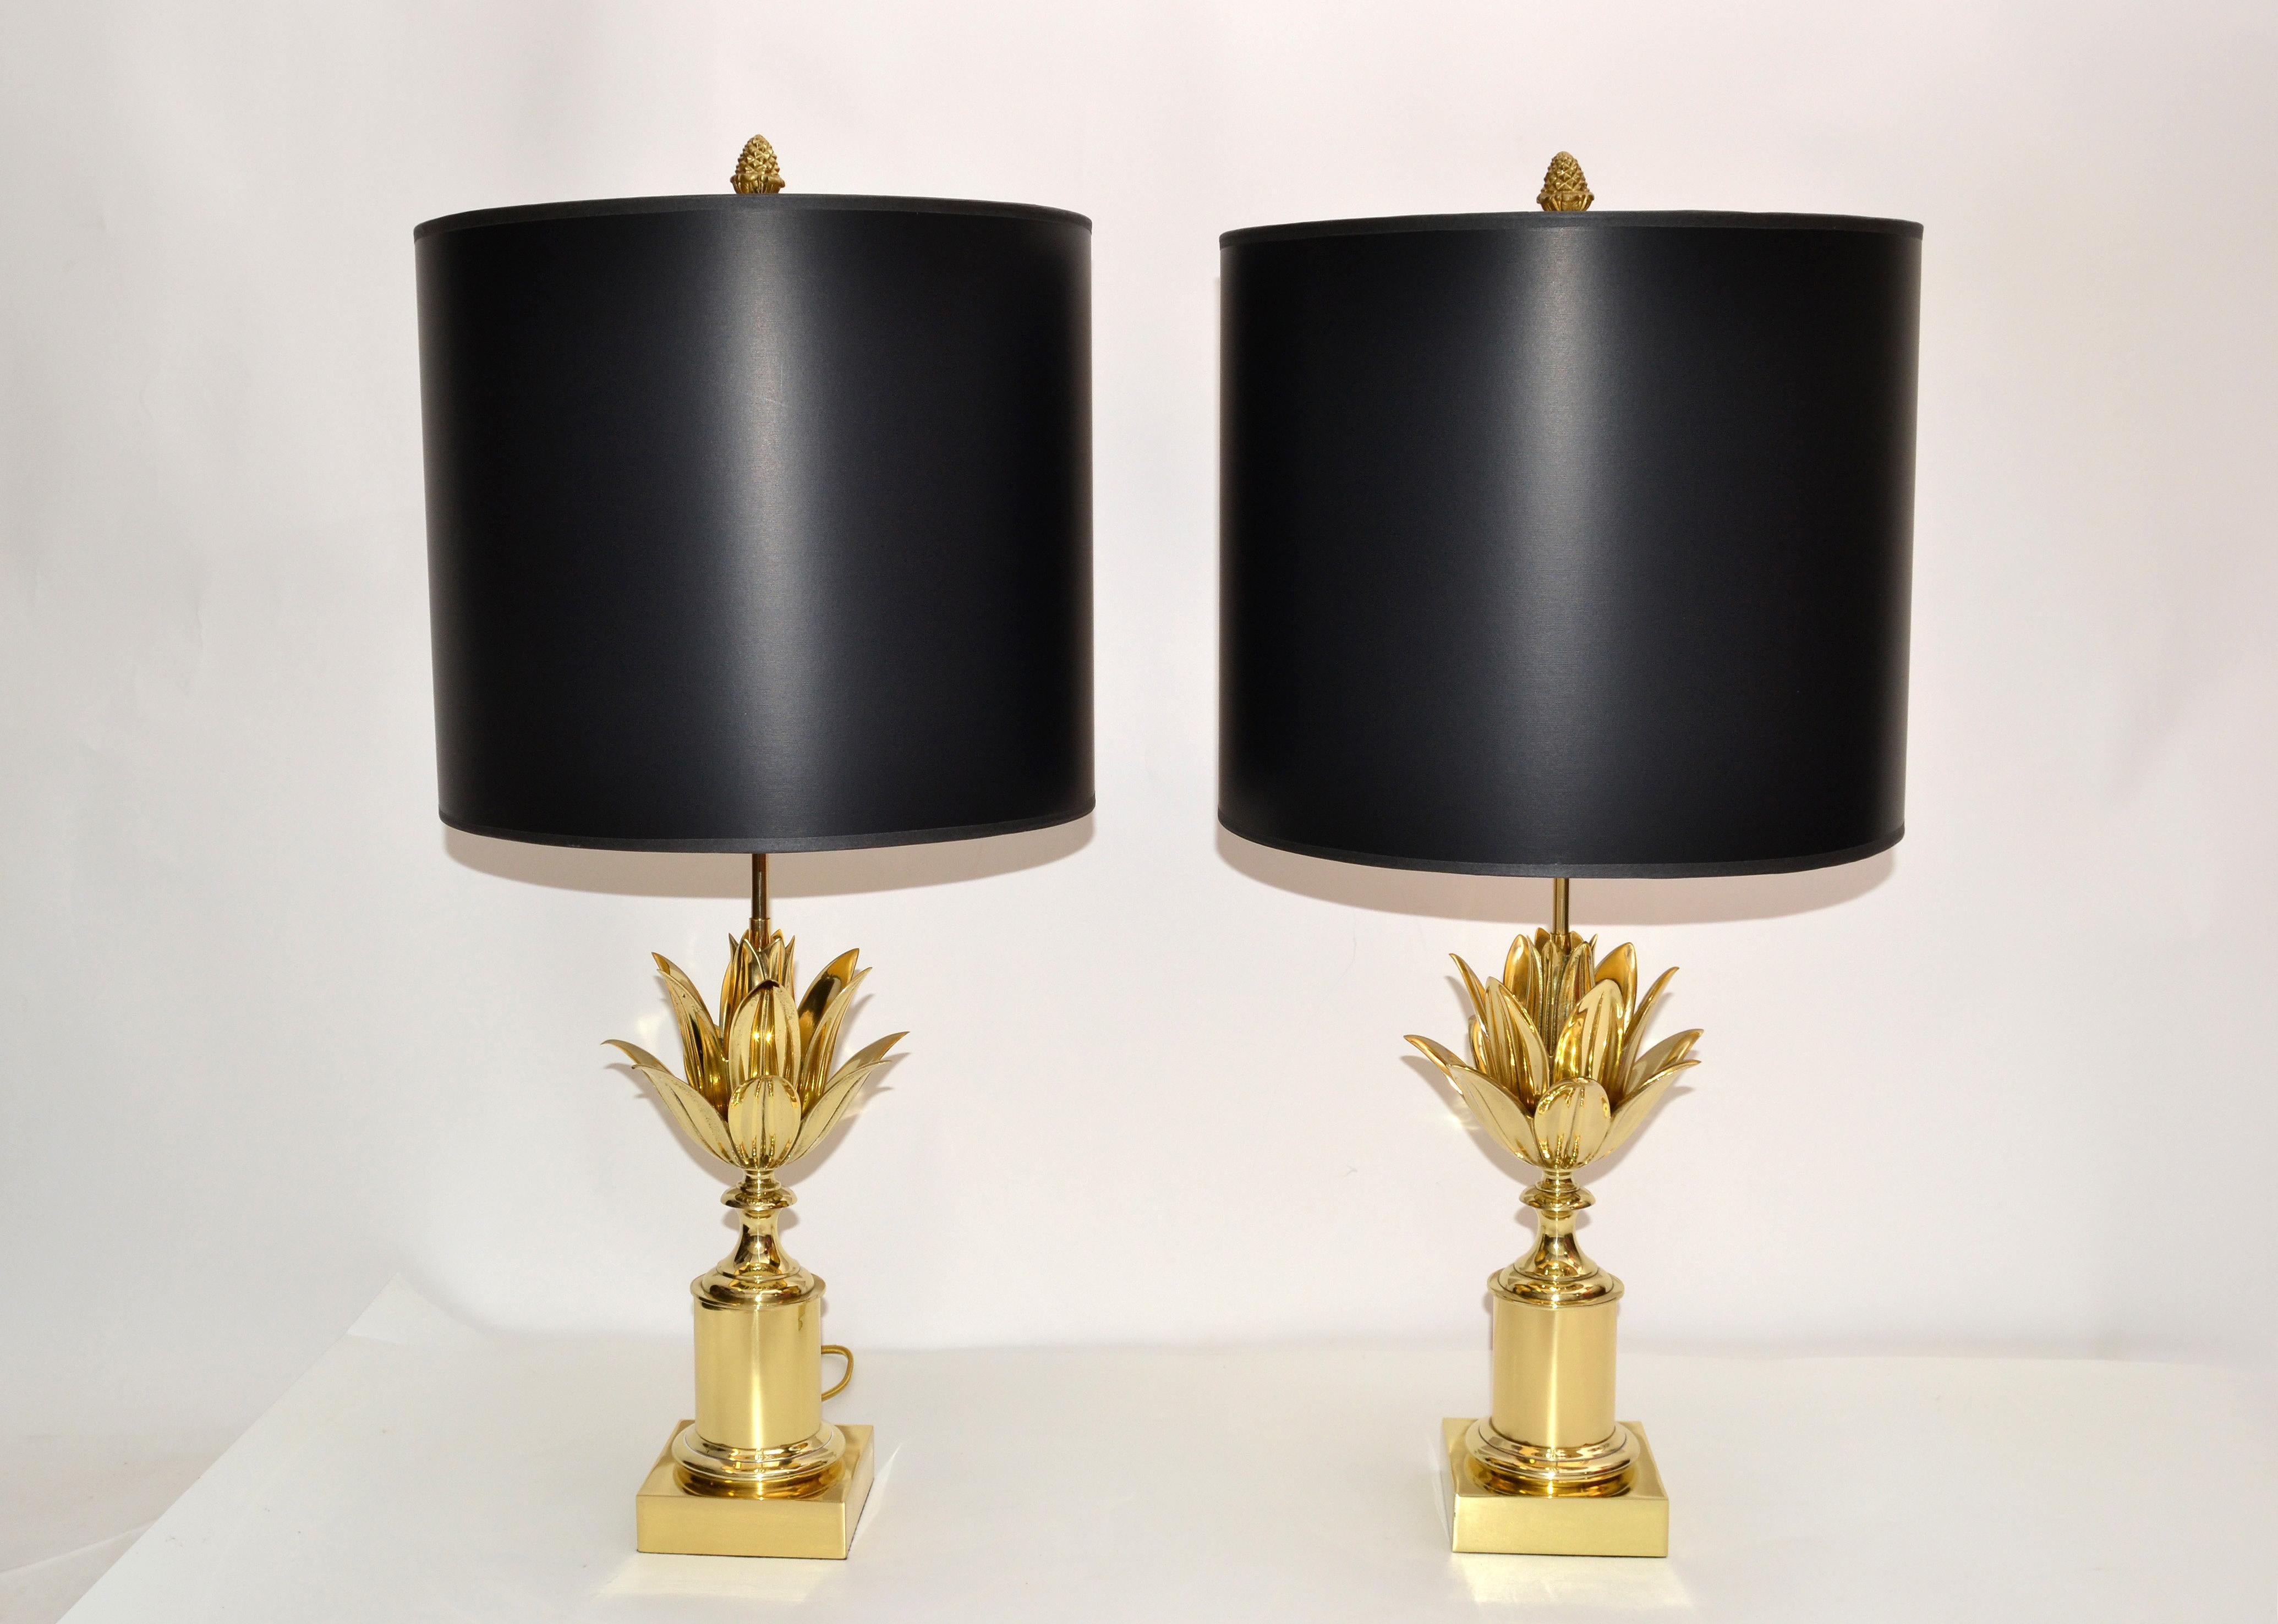 Superb pair of Maison Charles French neoclassical lotus table lamp in solid polished and lacquered bronze.
US rewired with golden Fabric Cord and has in between a transparent Hand Switch.
Each Lamp takes two light bulbs max 40 watts, LED work